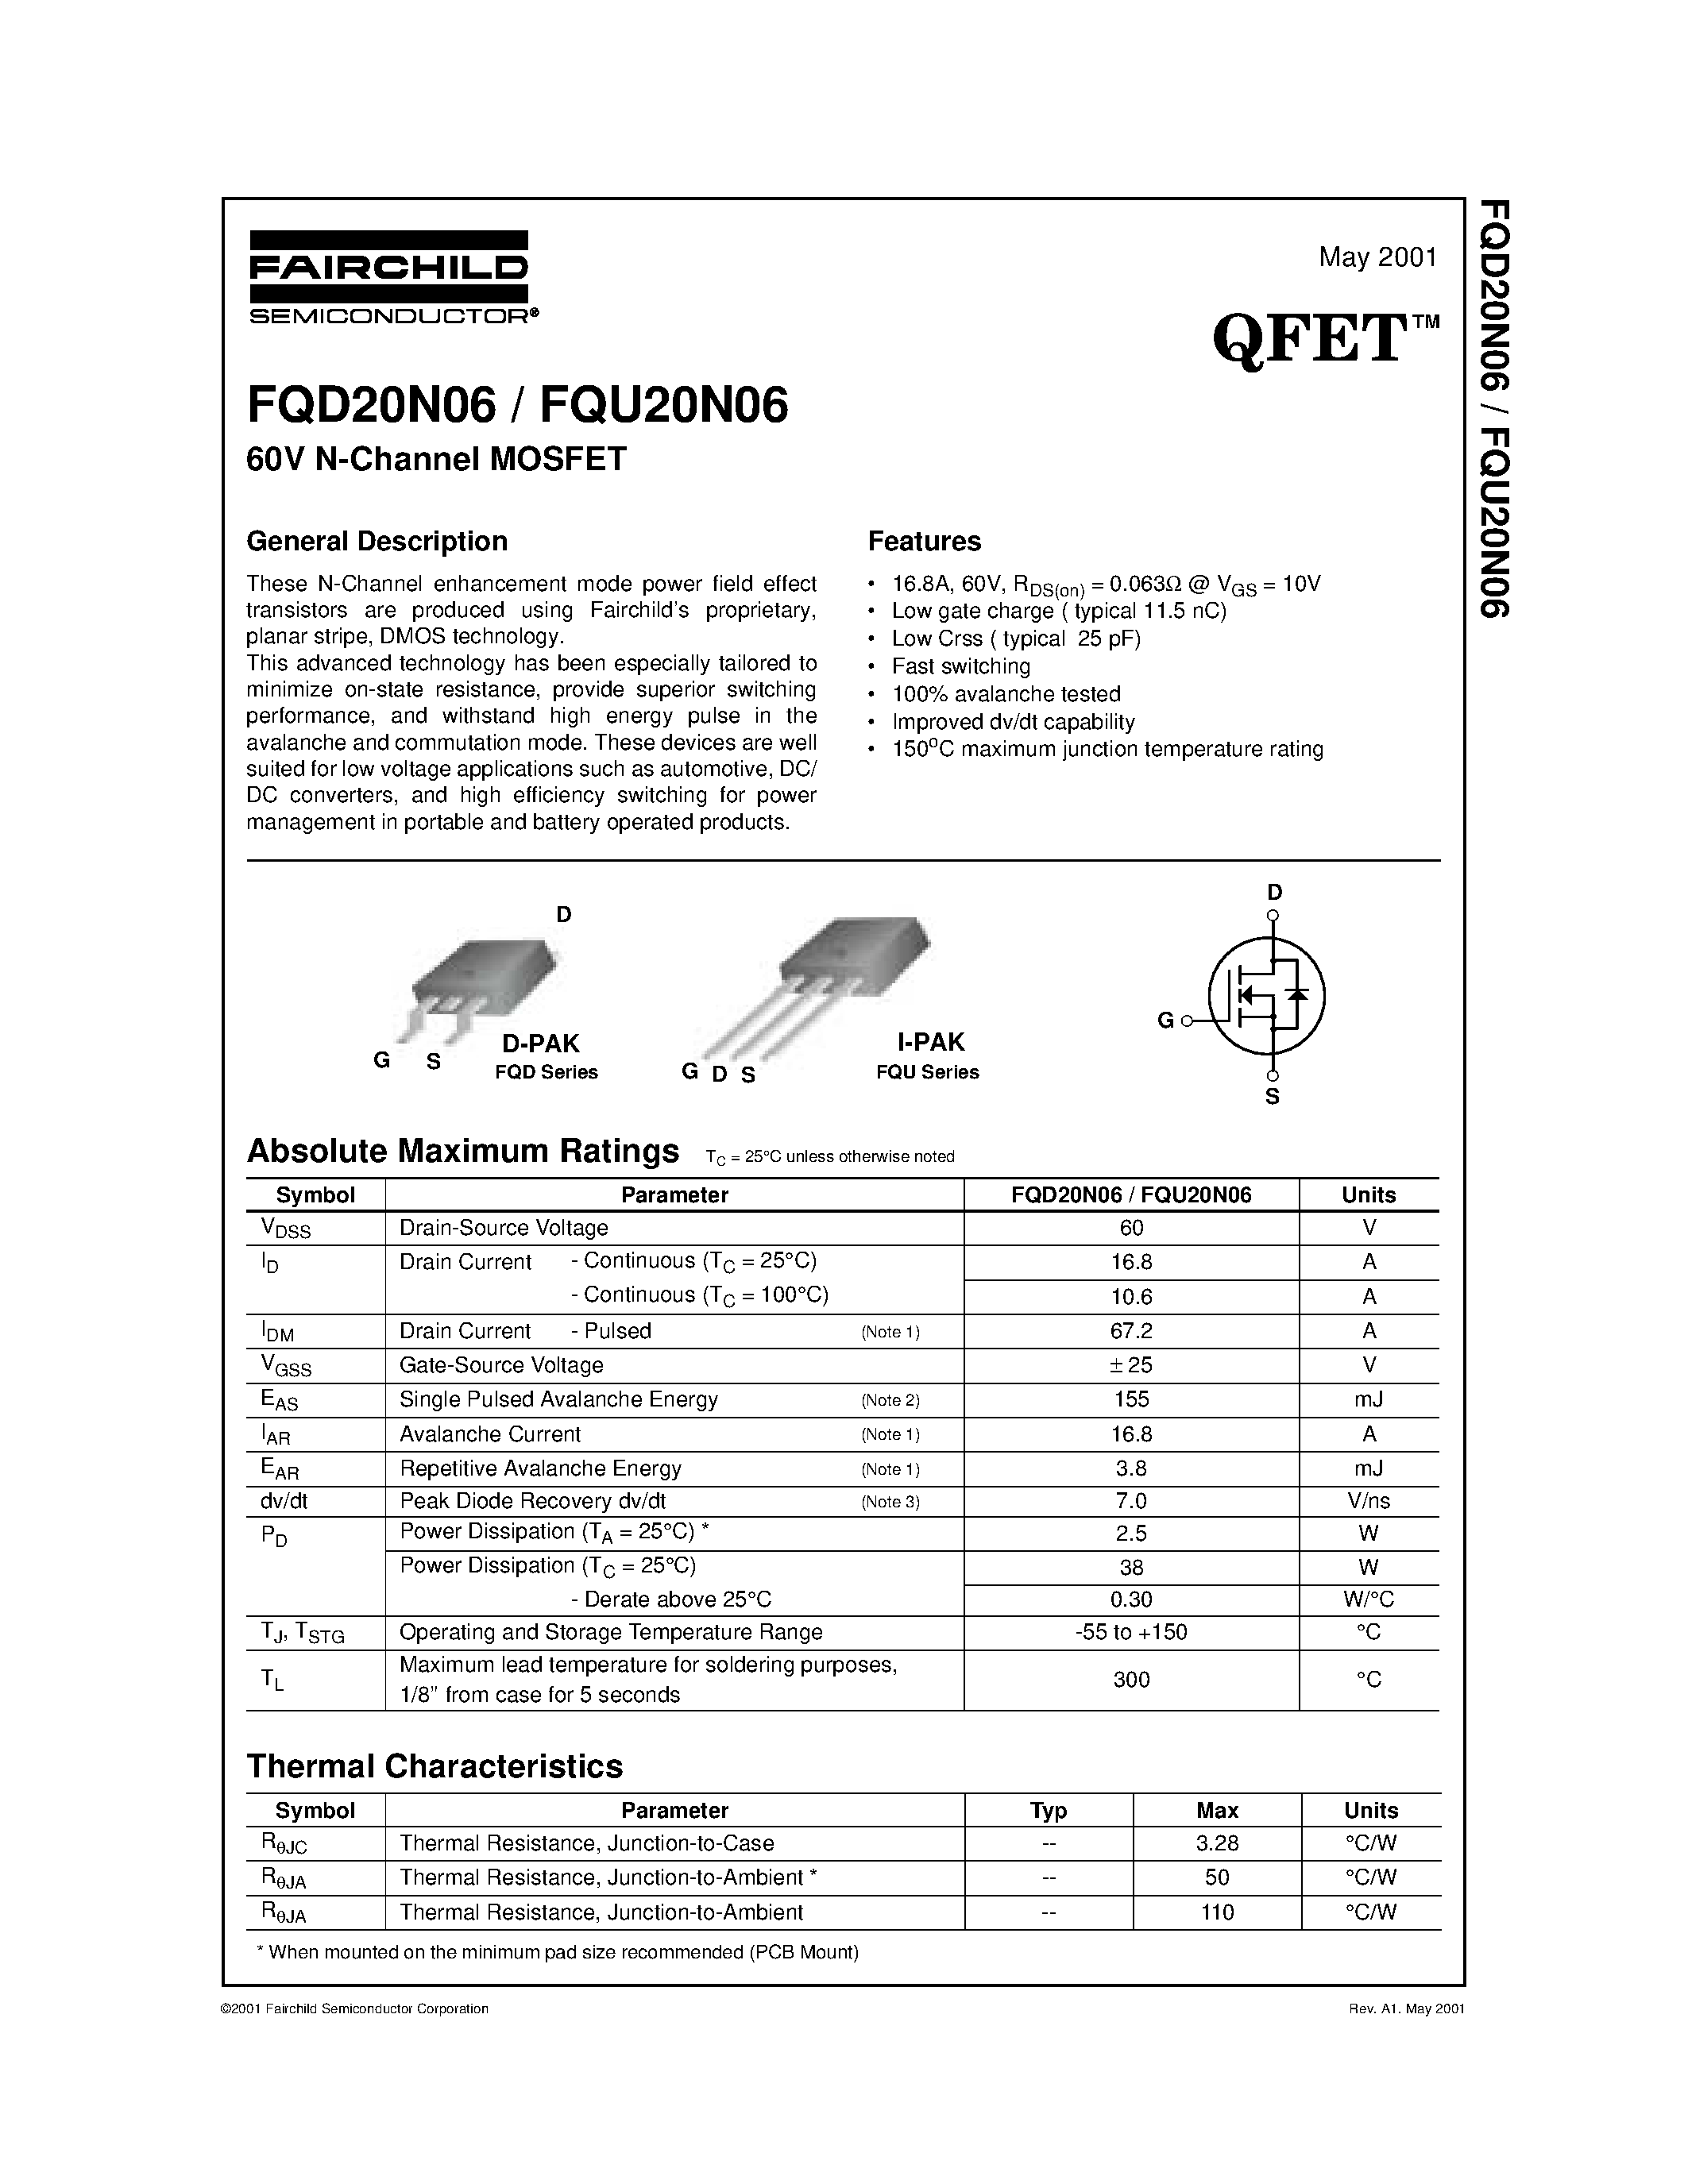 Datasheet FQD20N06 - 60V N-Channel MOSFET page 1